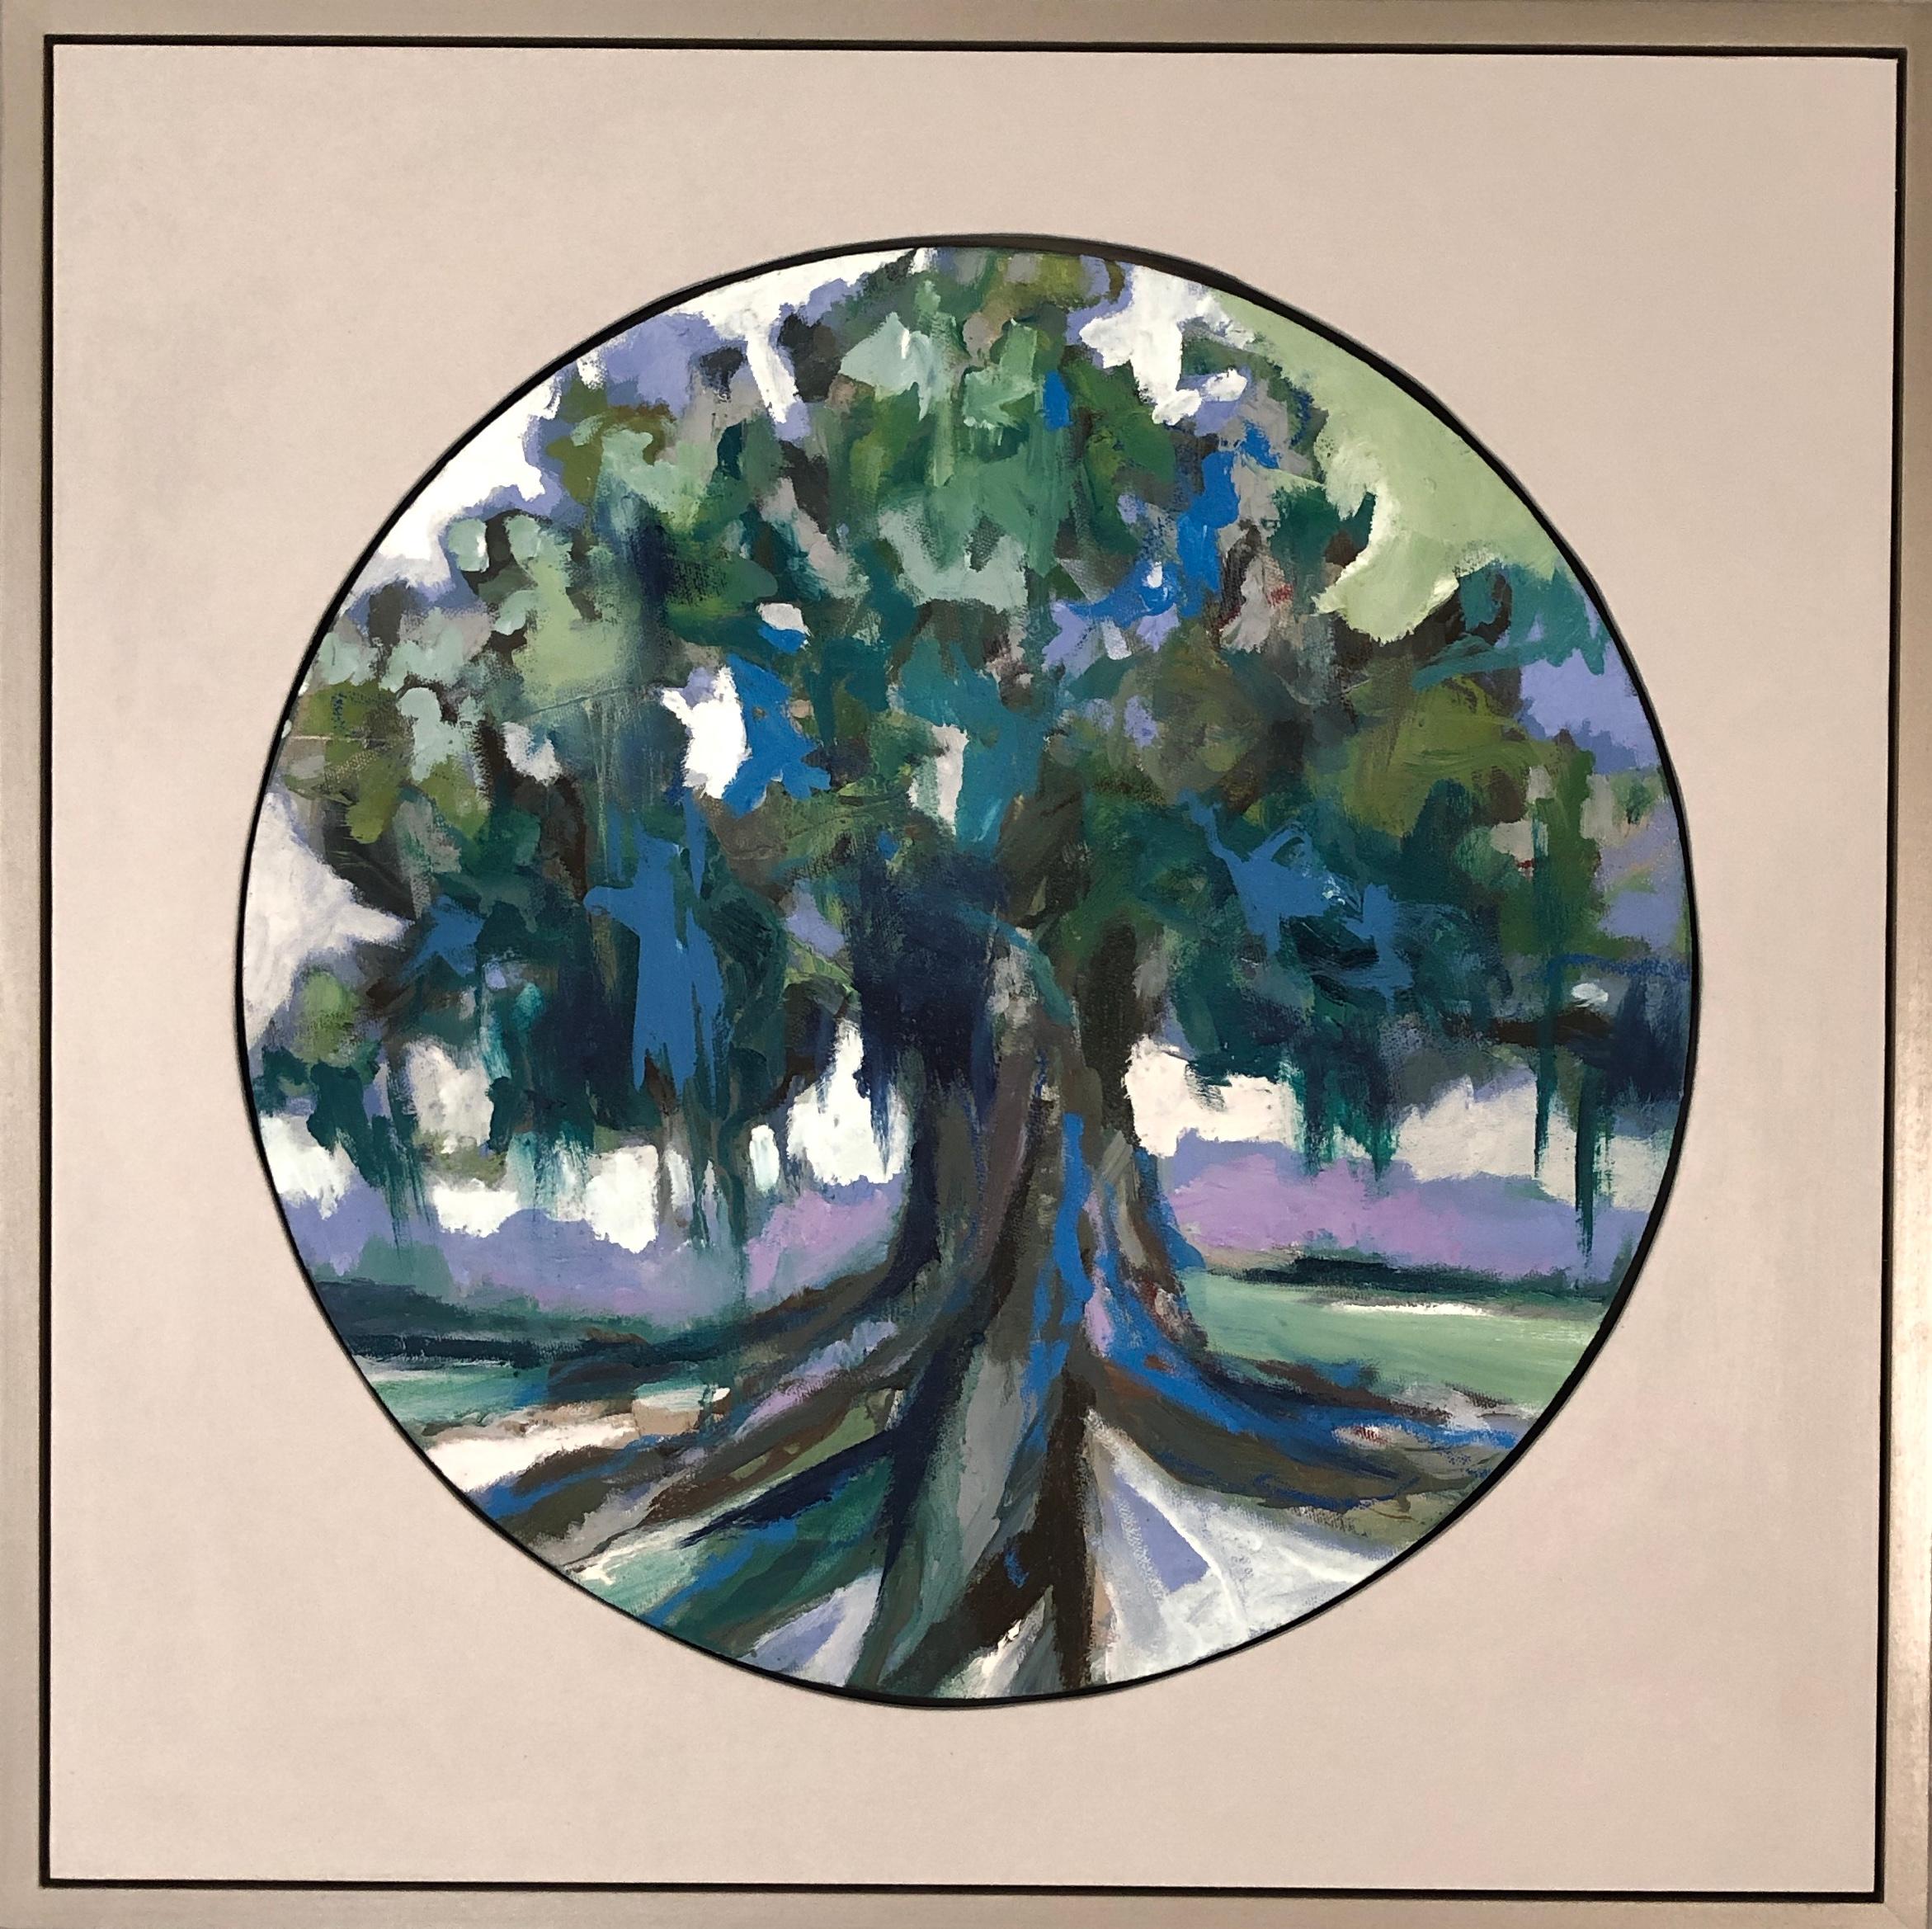 'Oak V' is a contemporary small oil and wax on canvas circular landscape painting set inside a square frame, created by American artist Kelli Kaufman in 2018. Featuring an exquisite palette made of a lovely tonality of green, blue, purple and brown